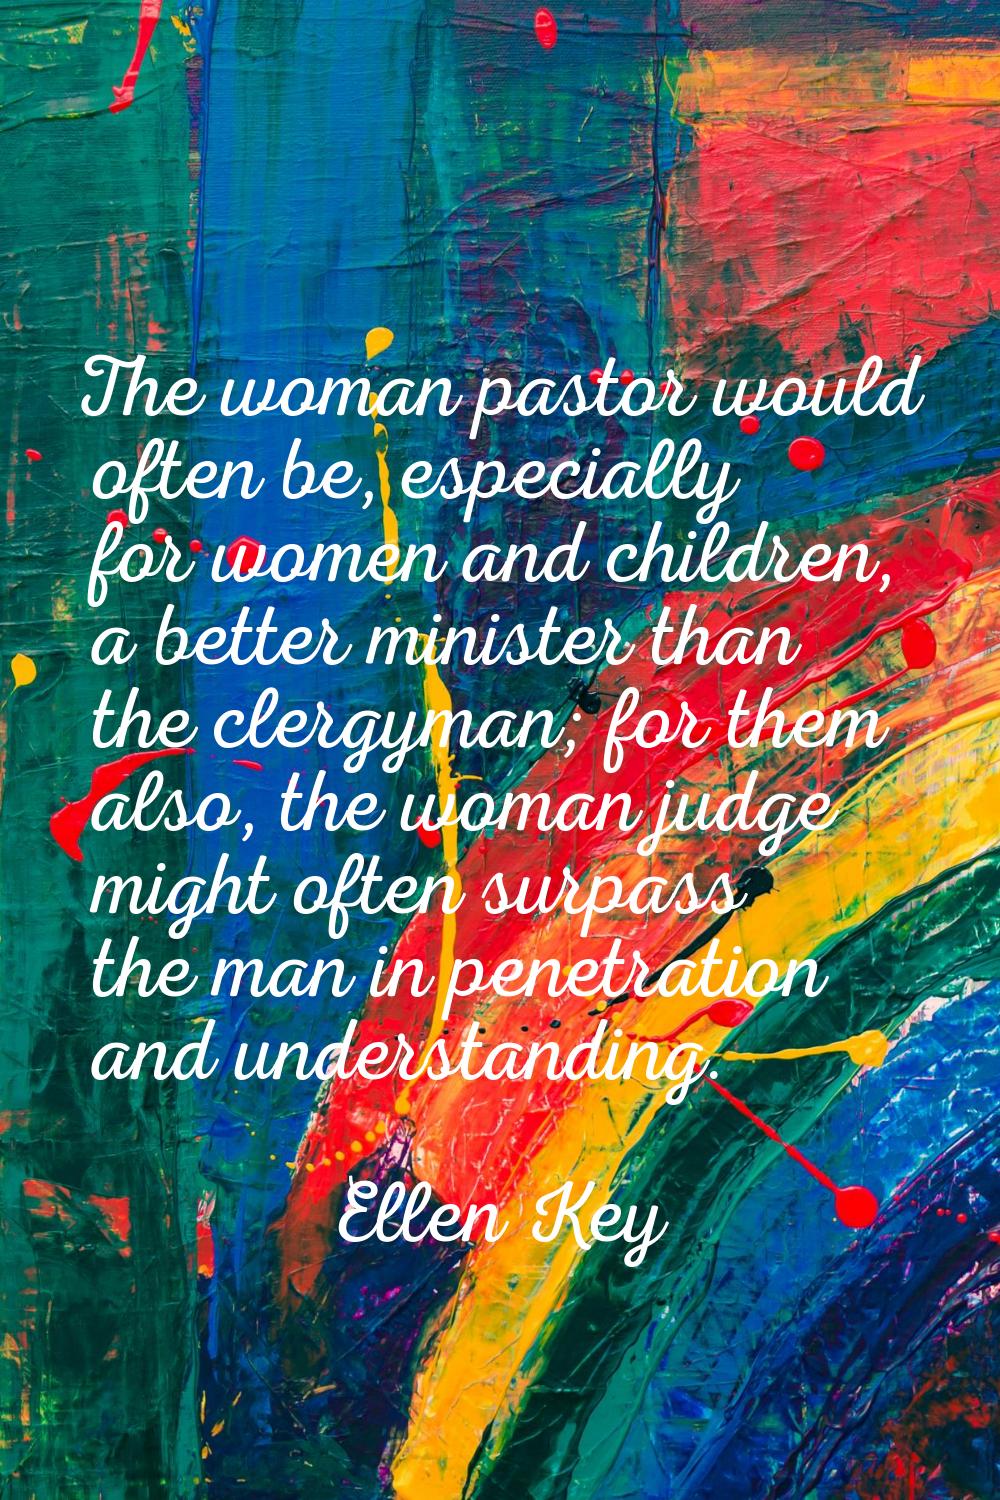 The woman pastor would often be, especially for women and children, a better minister than the cler